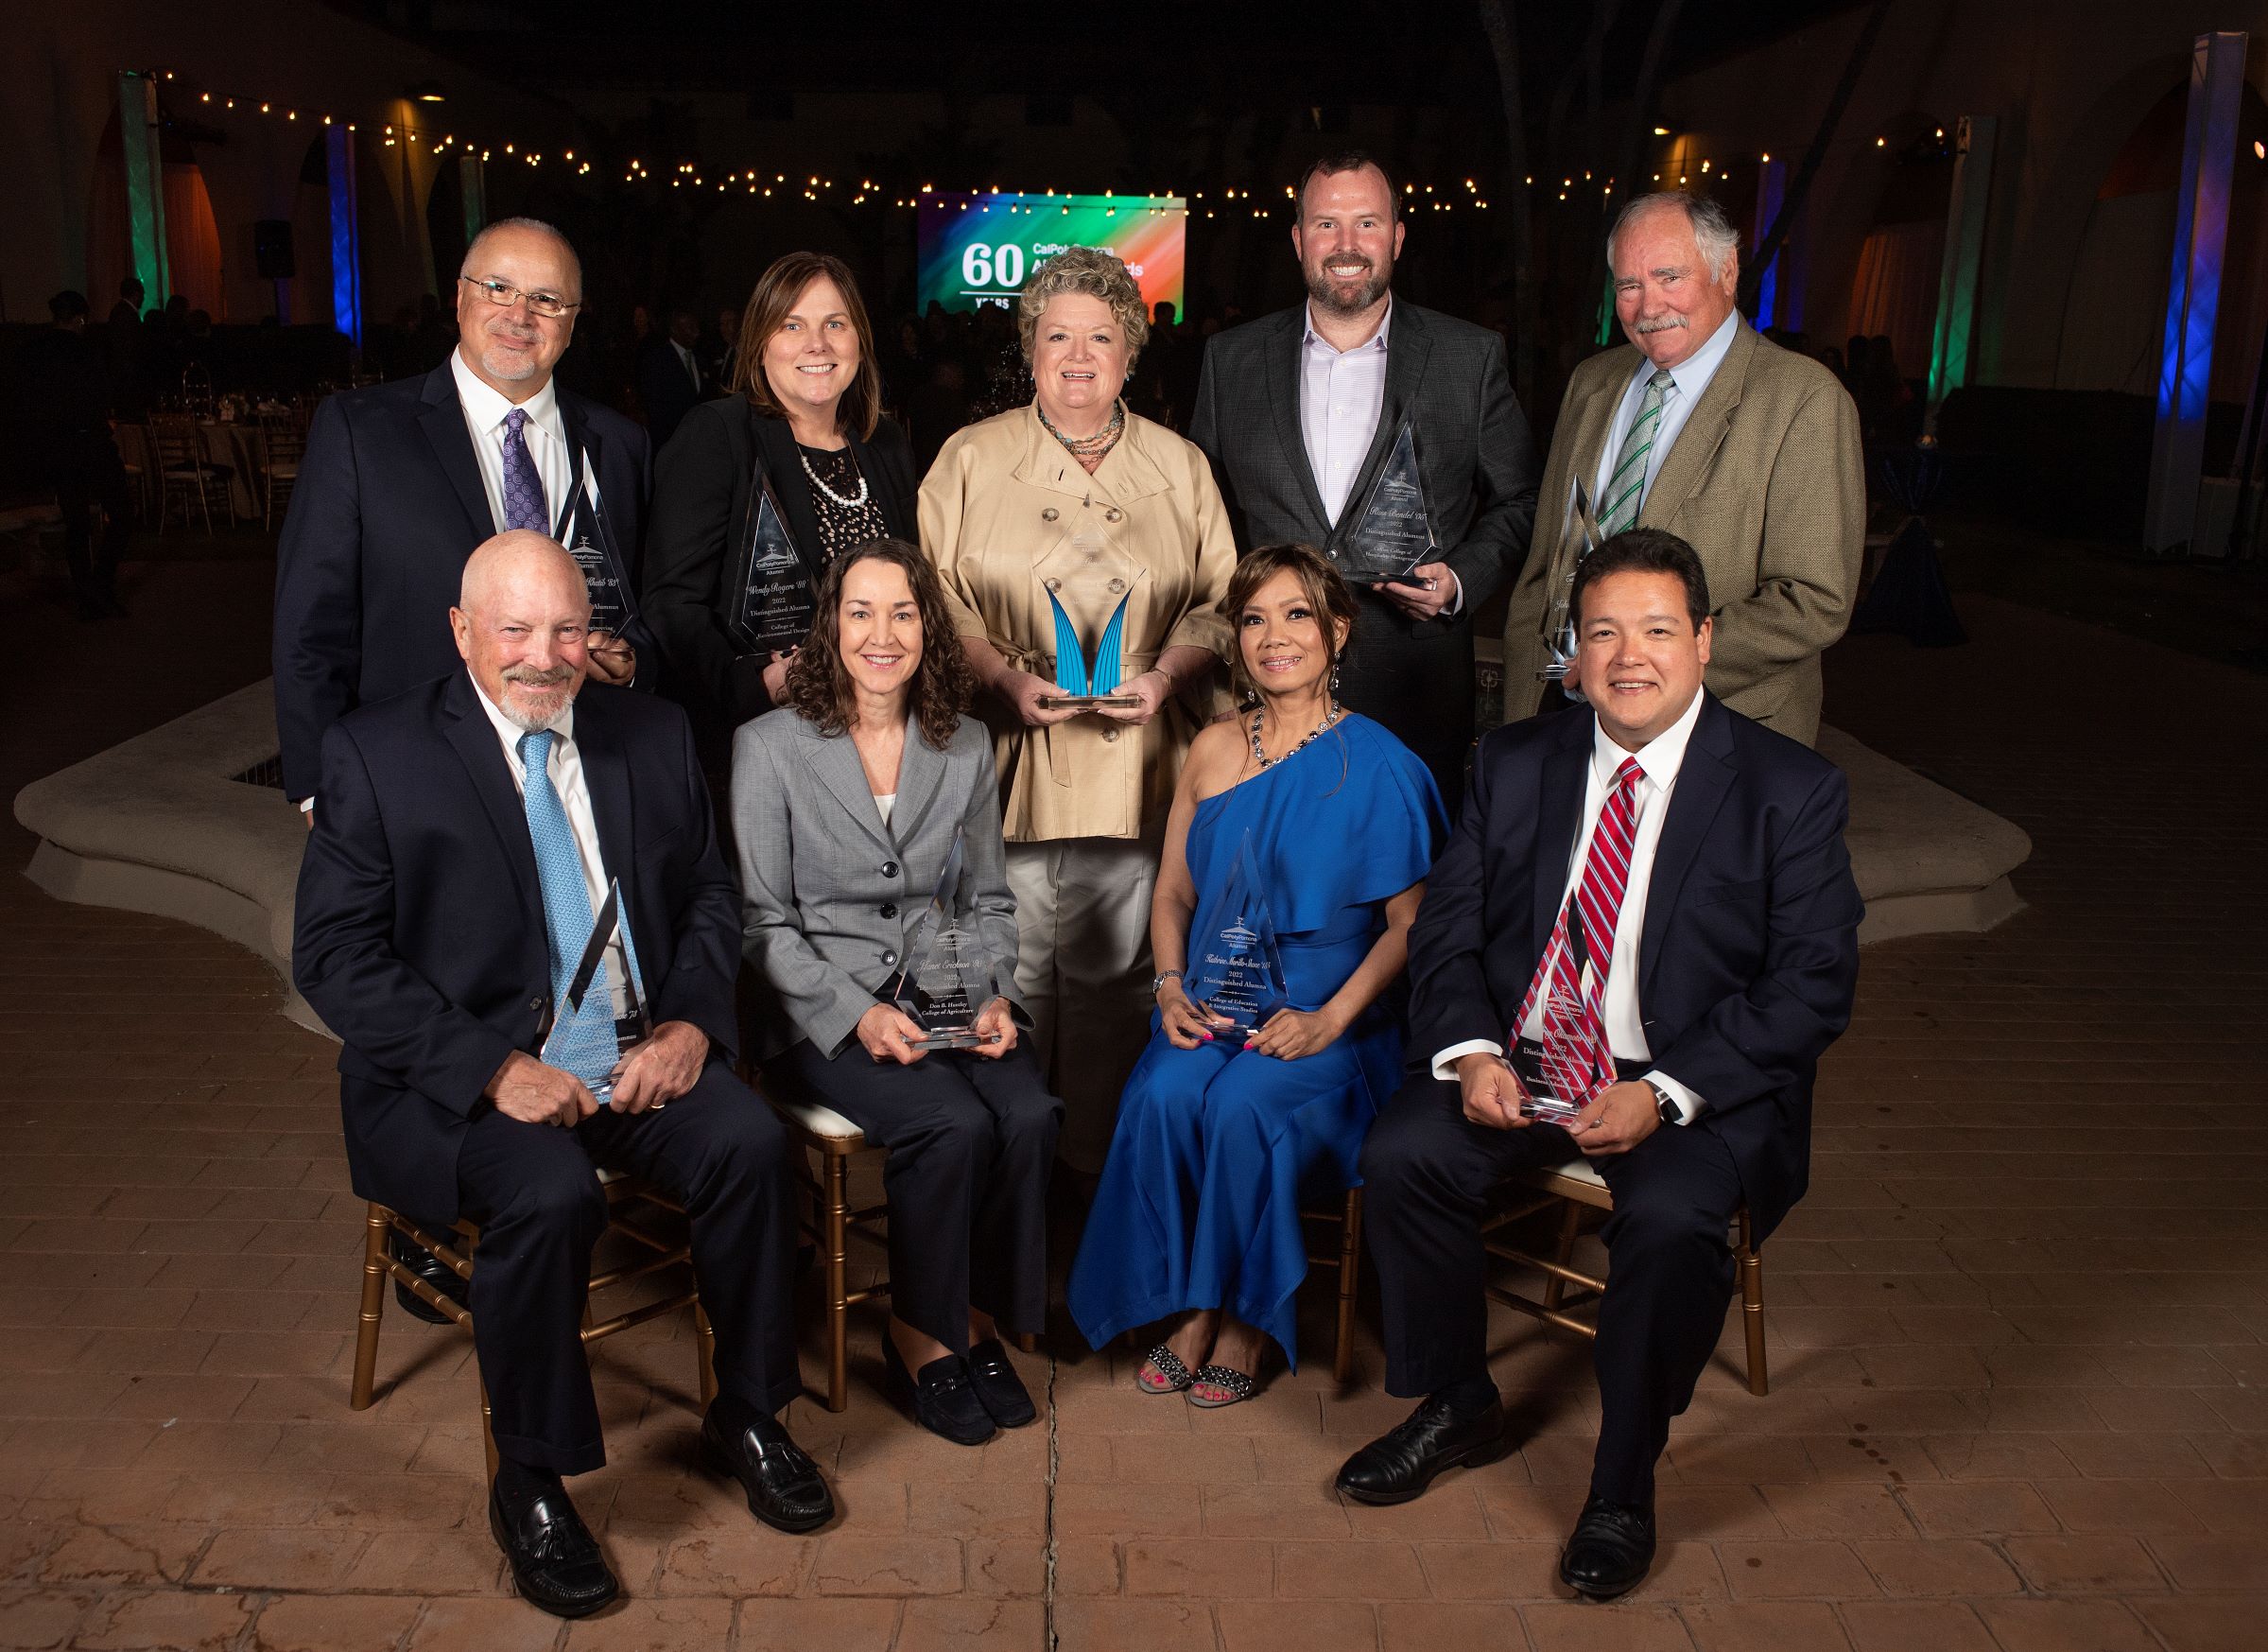 Group photo of 2018 honorees